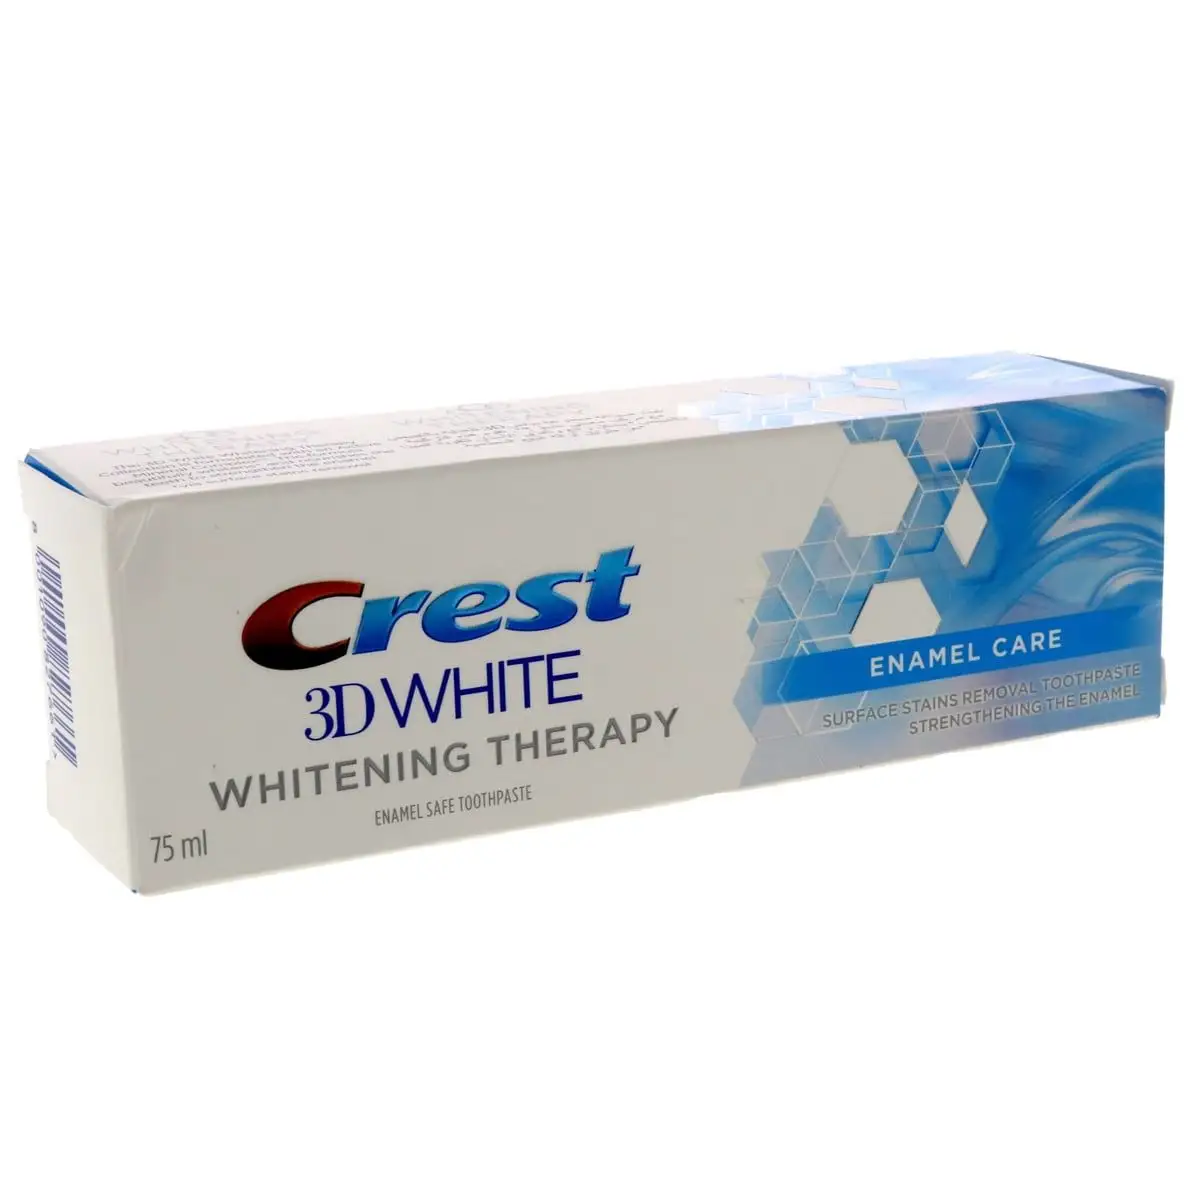 Crest Pro Health Toothpaste & Oral-B Pro Health All in One Toothbrush (2 Count) Bundle/Crest Cavity Protection Toothpaste